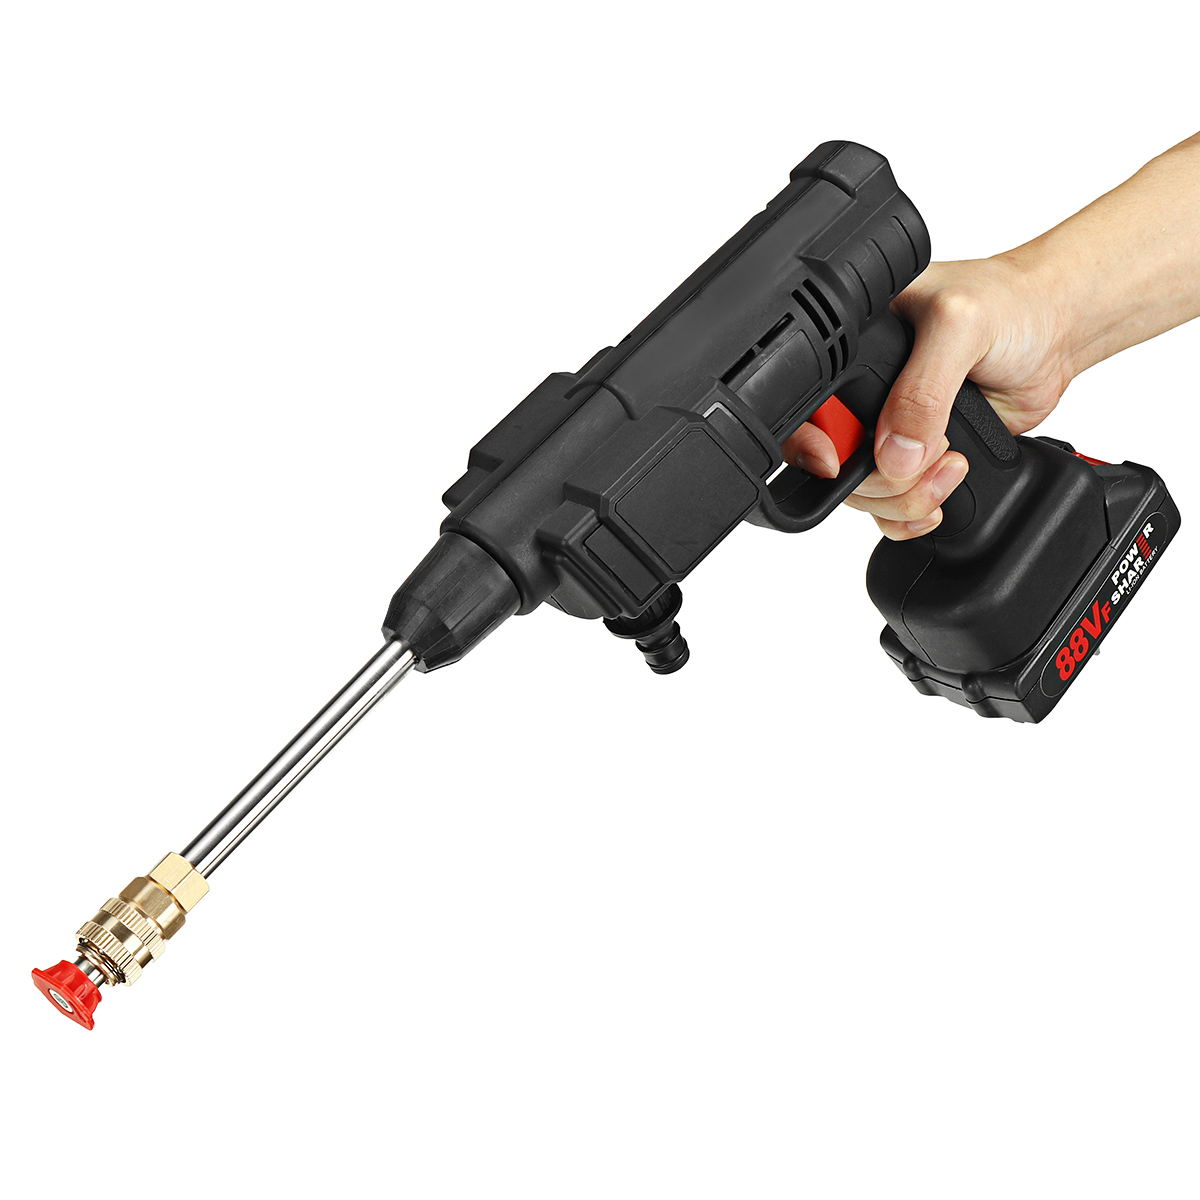 88VF-Cordless-High-Pressure-Washer-Car-Washing-Machine-Water-Spayer-Guns-Vehicle-Cleaning-Tool-W-Non-1867531-6